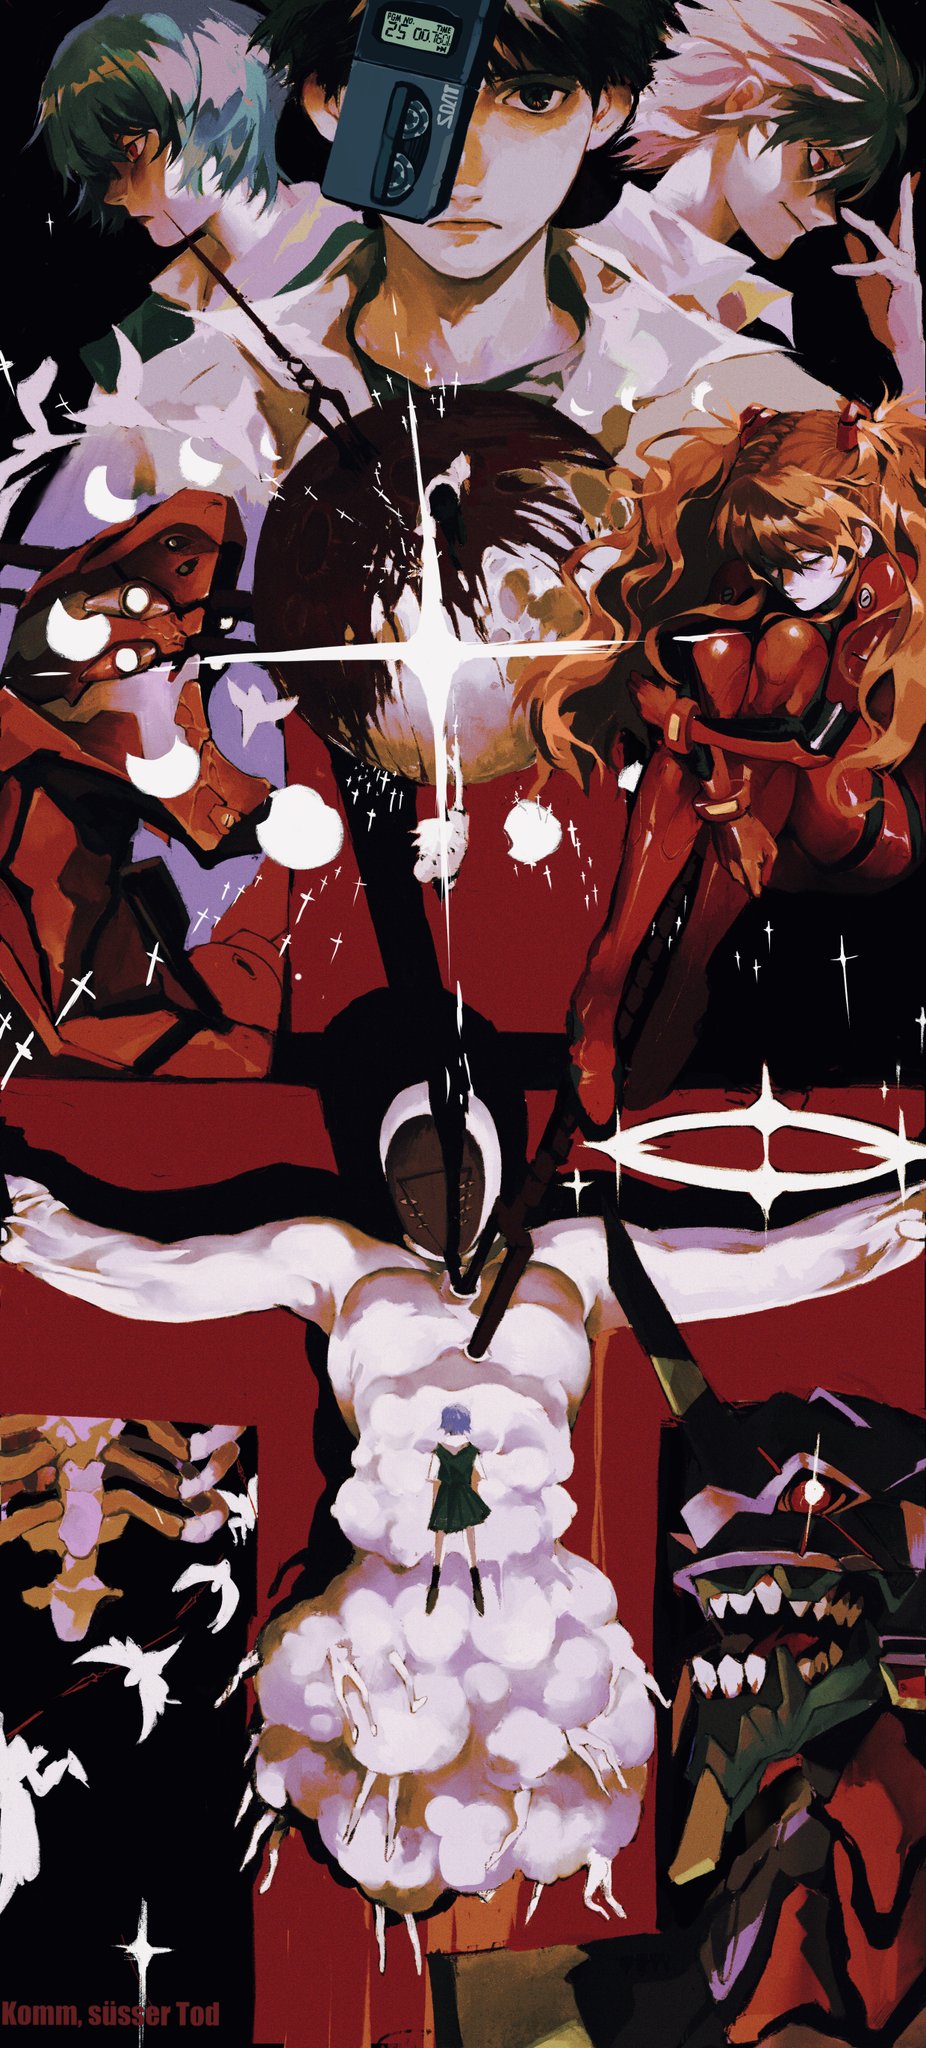 2boys 2girls 6+others abstract angel black_eyes black_hair blood blue_hair bone character_request closed_eyes closed_mouth cross curled_up english_text flesh floating glowing glowing_eyes grey_hair halo highres long_hair mecha moon multiple_boys multiple_girls multiple_others neon_genesis_evangelion open_eyes open_mouth orange_hair plugsuit pointing polearm red_eyes ribs shadow short_hair spear spikes suzumesakiii tagme tape_recorder teeth twintails veins weapon white_hair wings